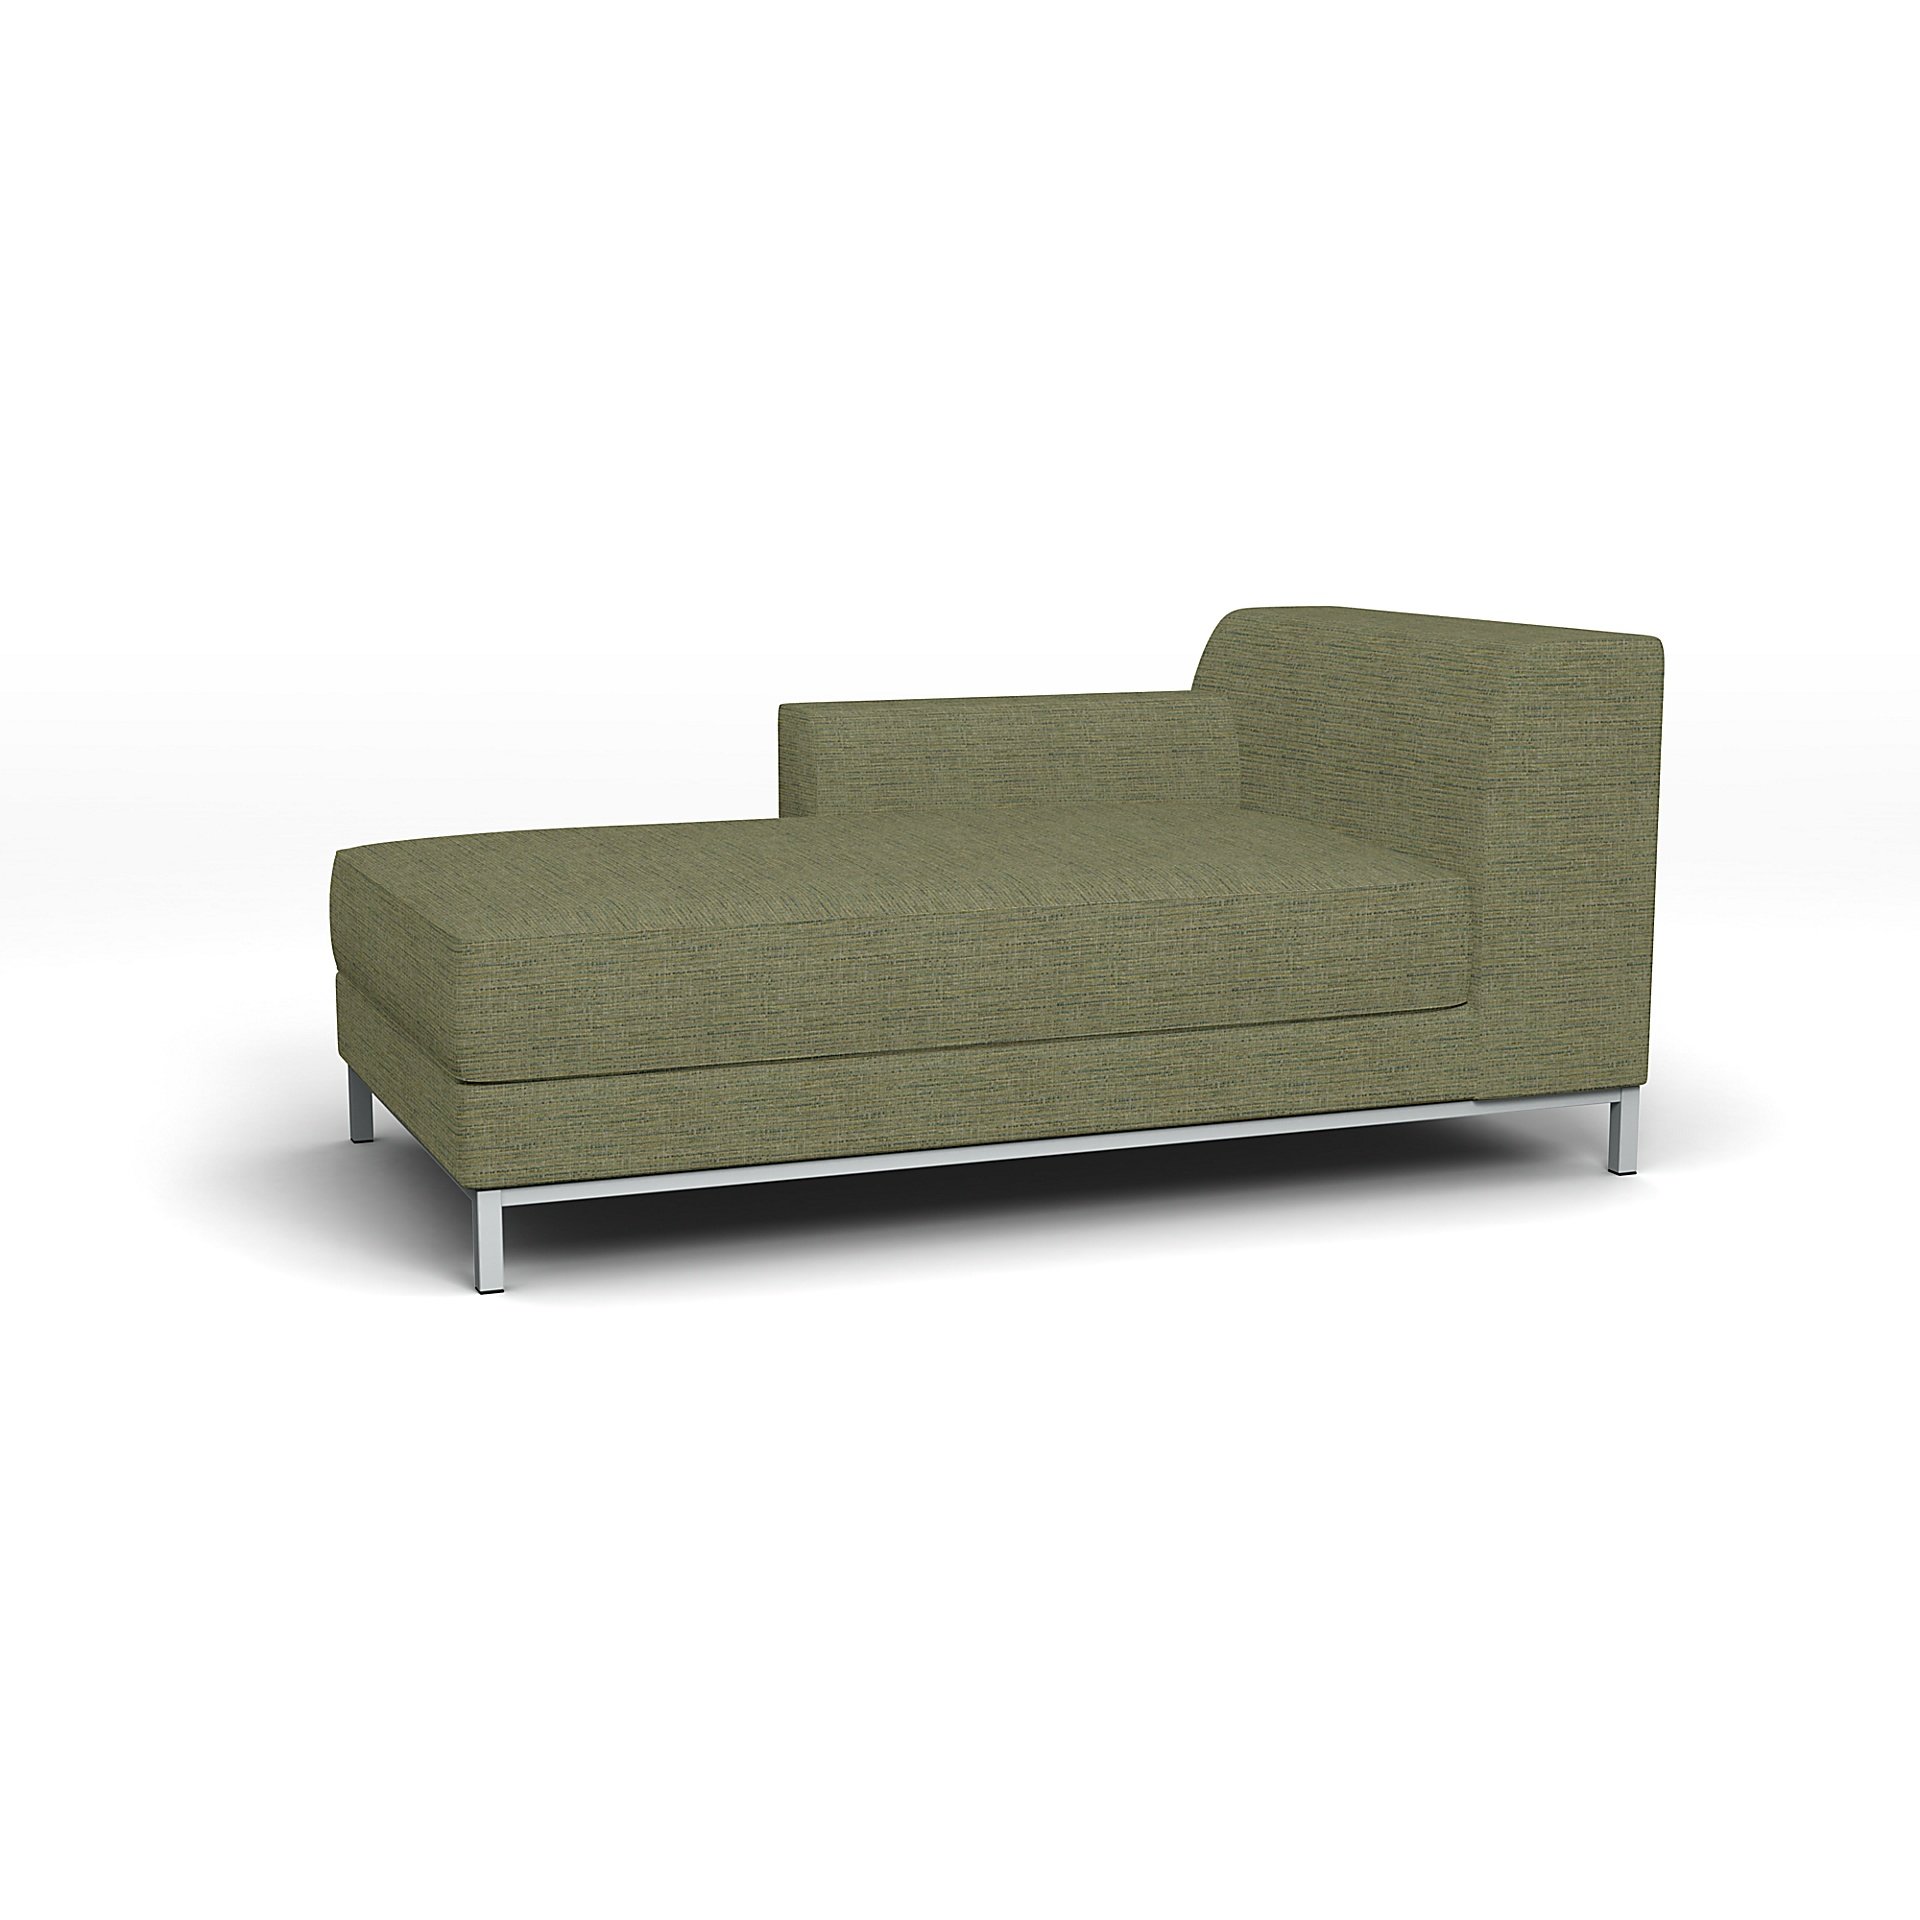 IKEA - Kramfors Chaise Longue with Left Arm Cover, Meadow Green, Boucle & Texture - Bemz